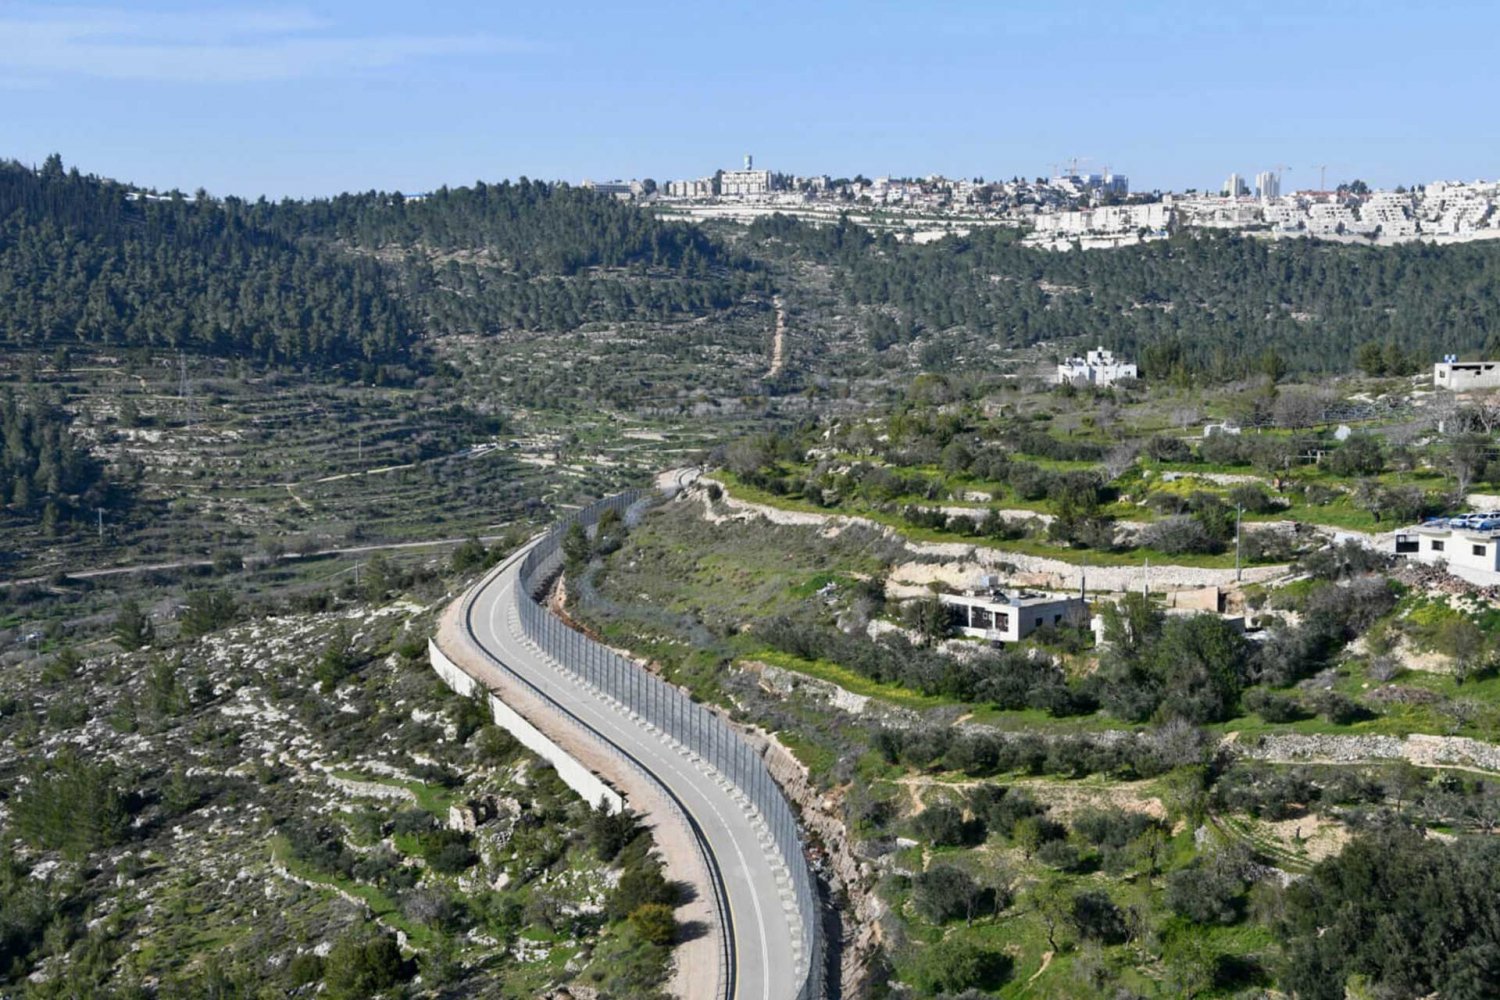 The Separation Wall slices through the Palestinian agricultural village of al-Walaja